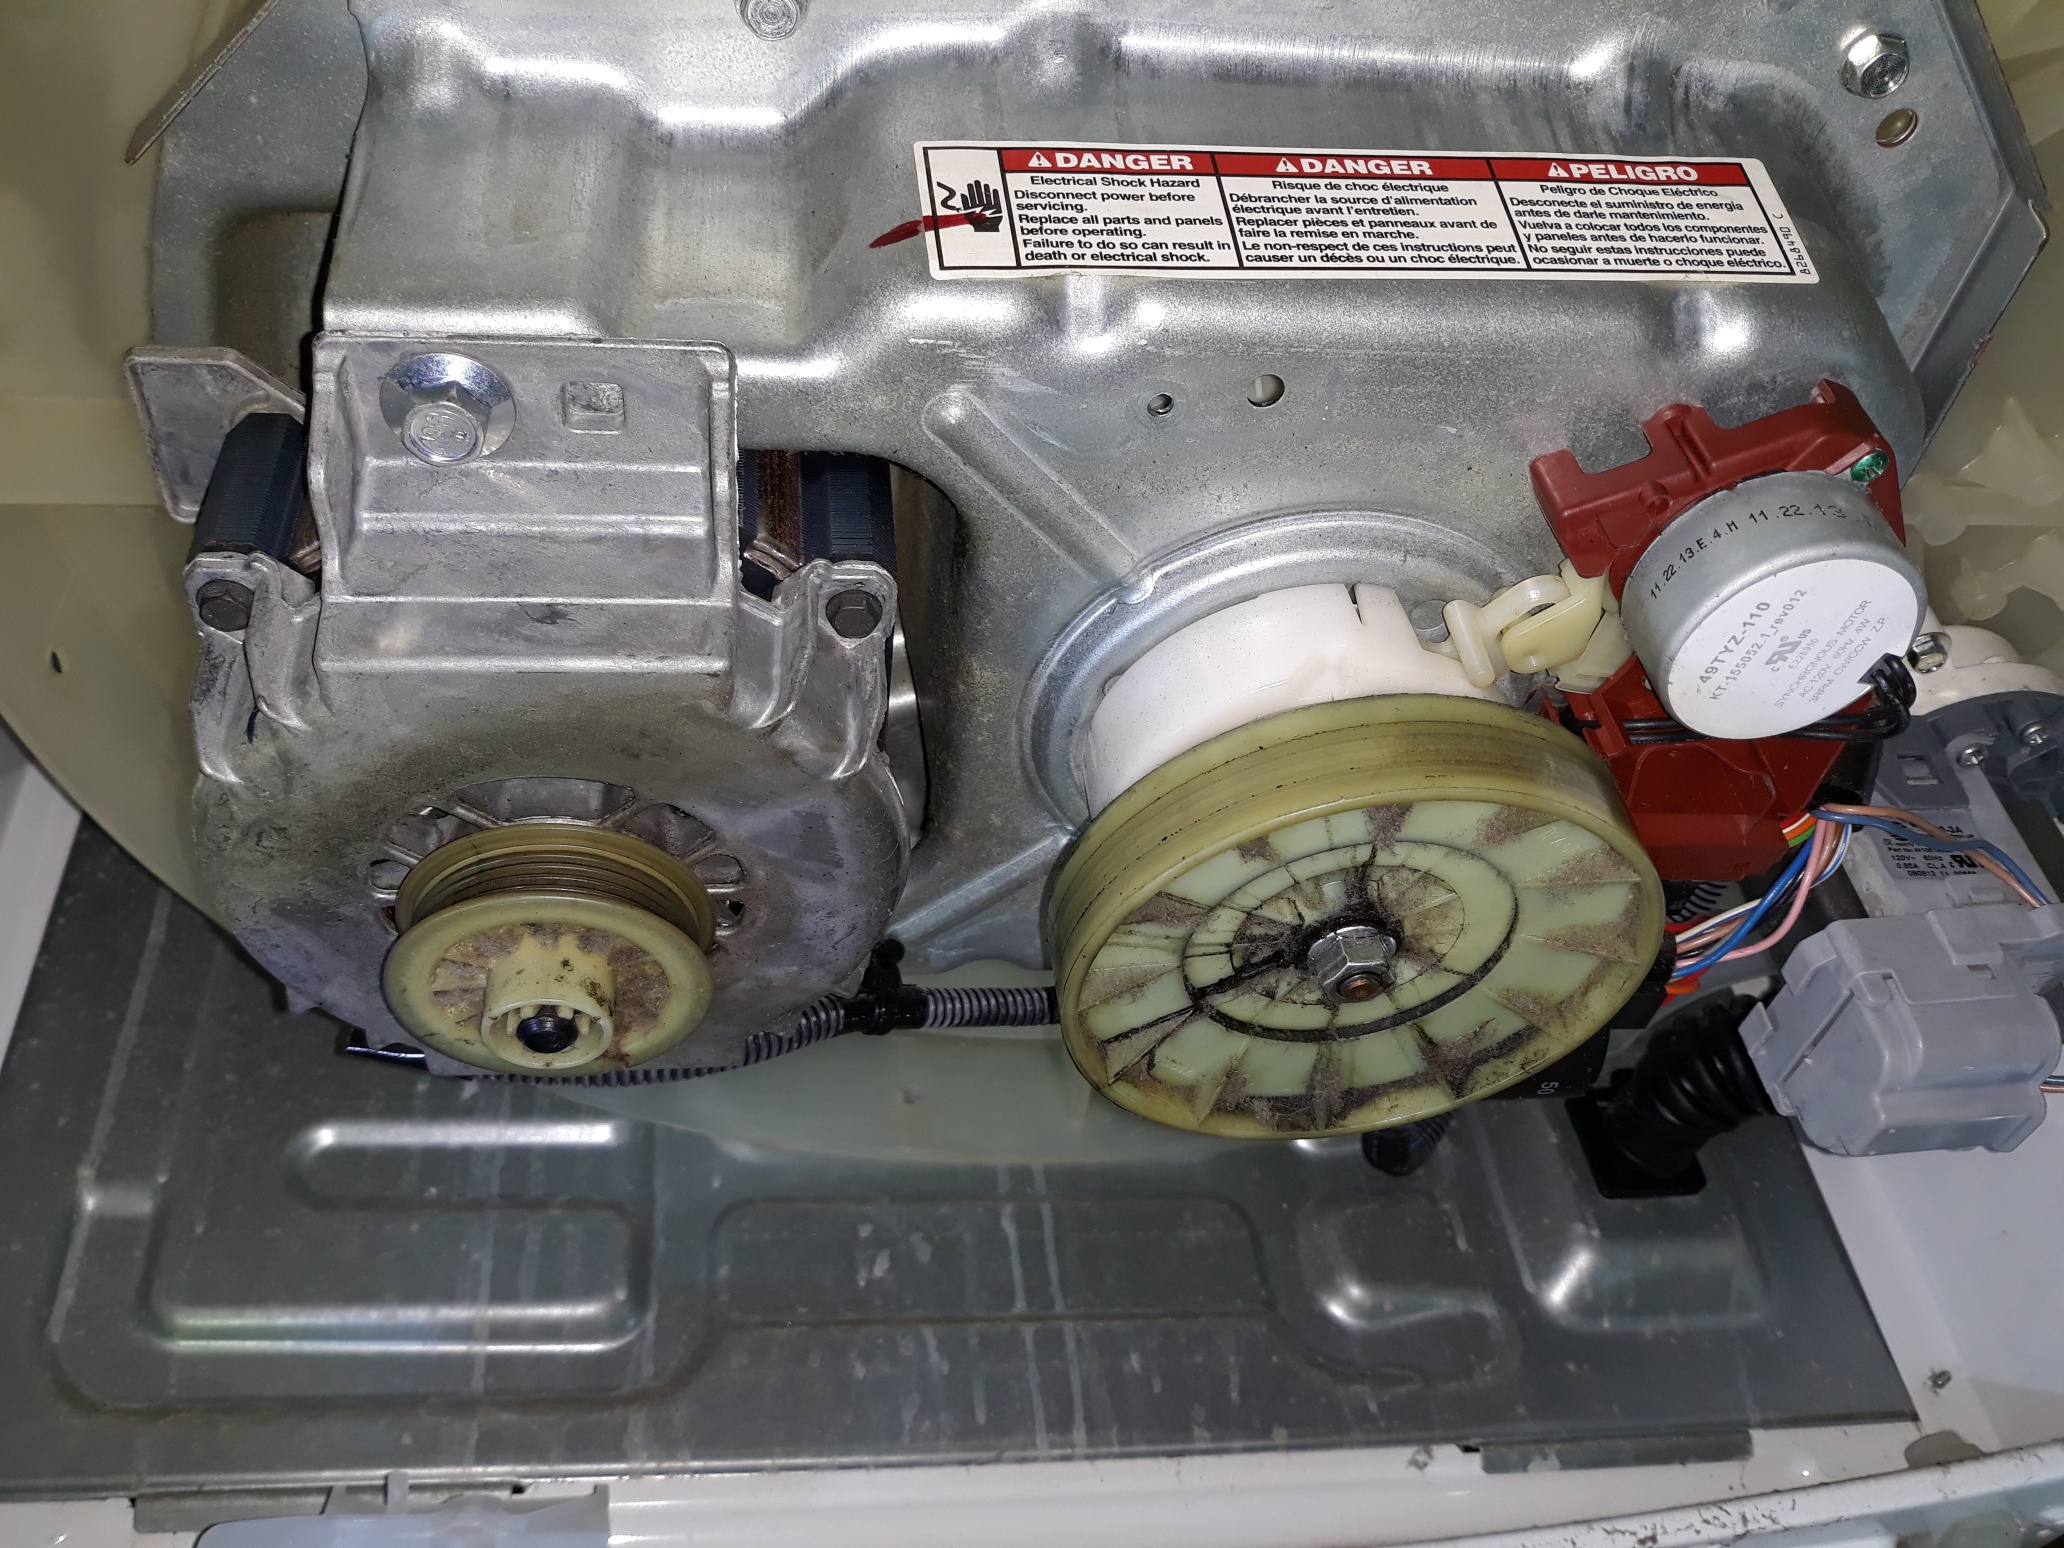 appliance repair washer repair repaired by replacement of the failed drive gear assembly and clutch assembly with new parts golden eagle dr wildwood oxford fl 34484